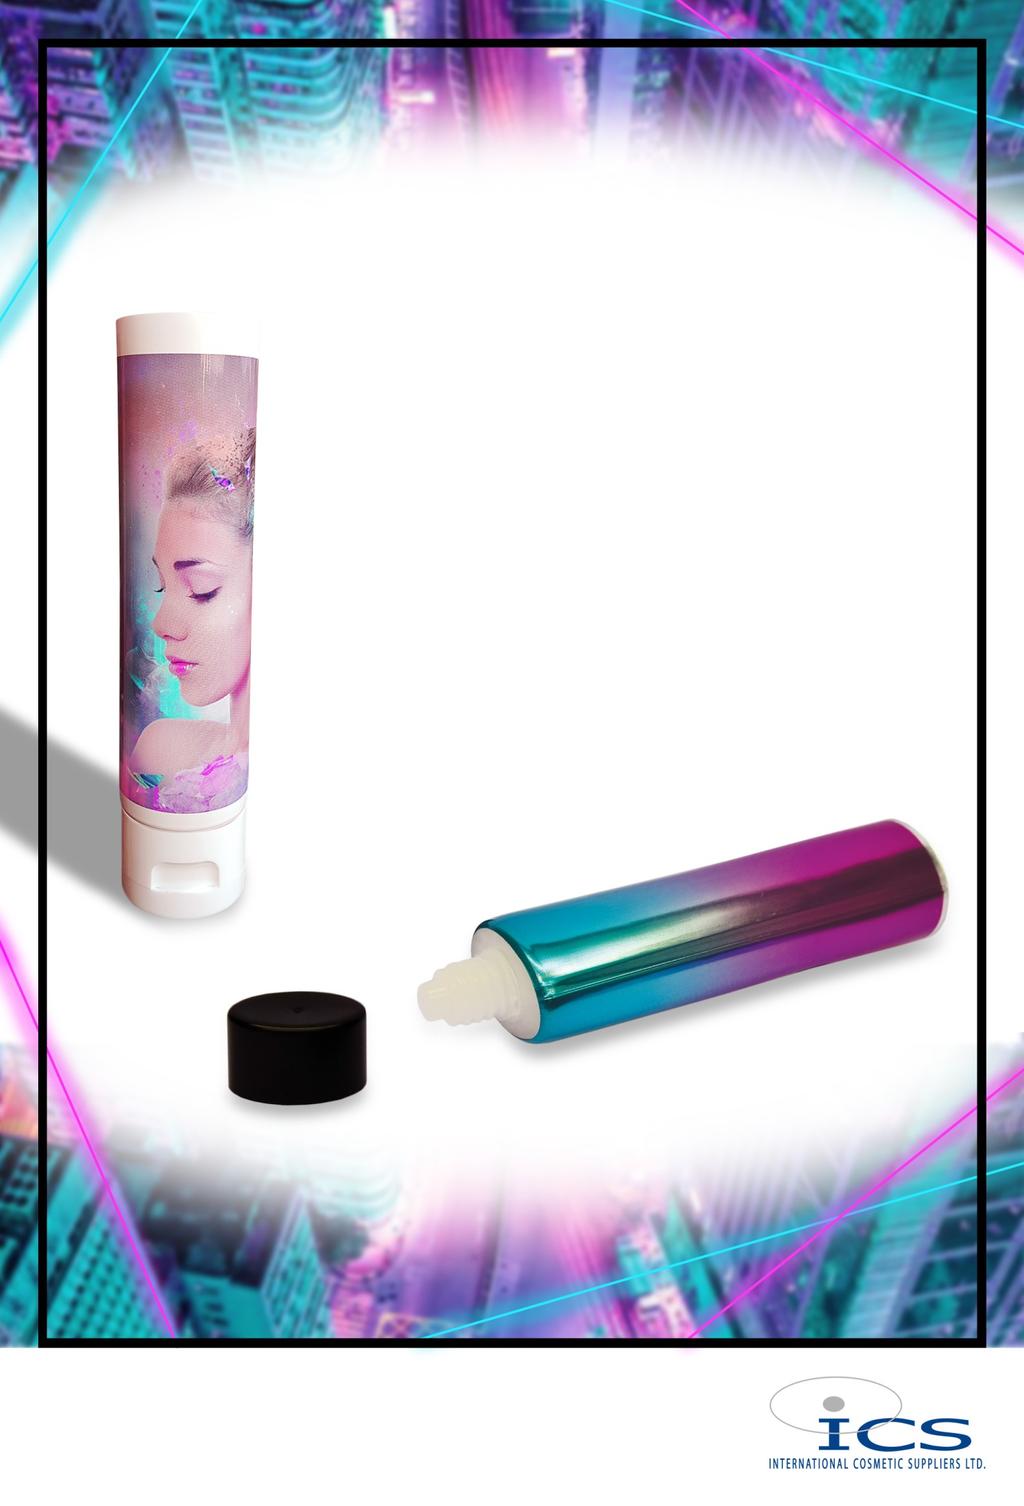 HD Flexography Tube The future of tube technology is here with our photo quality HD Flexographic Tubes Flaunt HD photo quality designs on your next tube project with our new Flexo print technology.